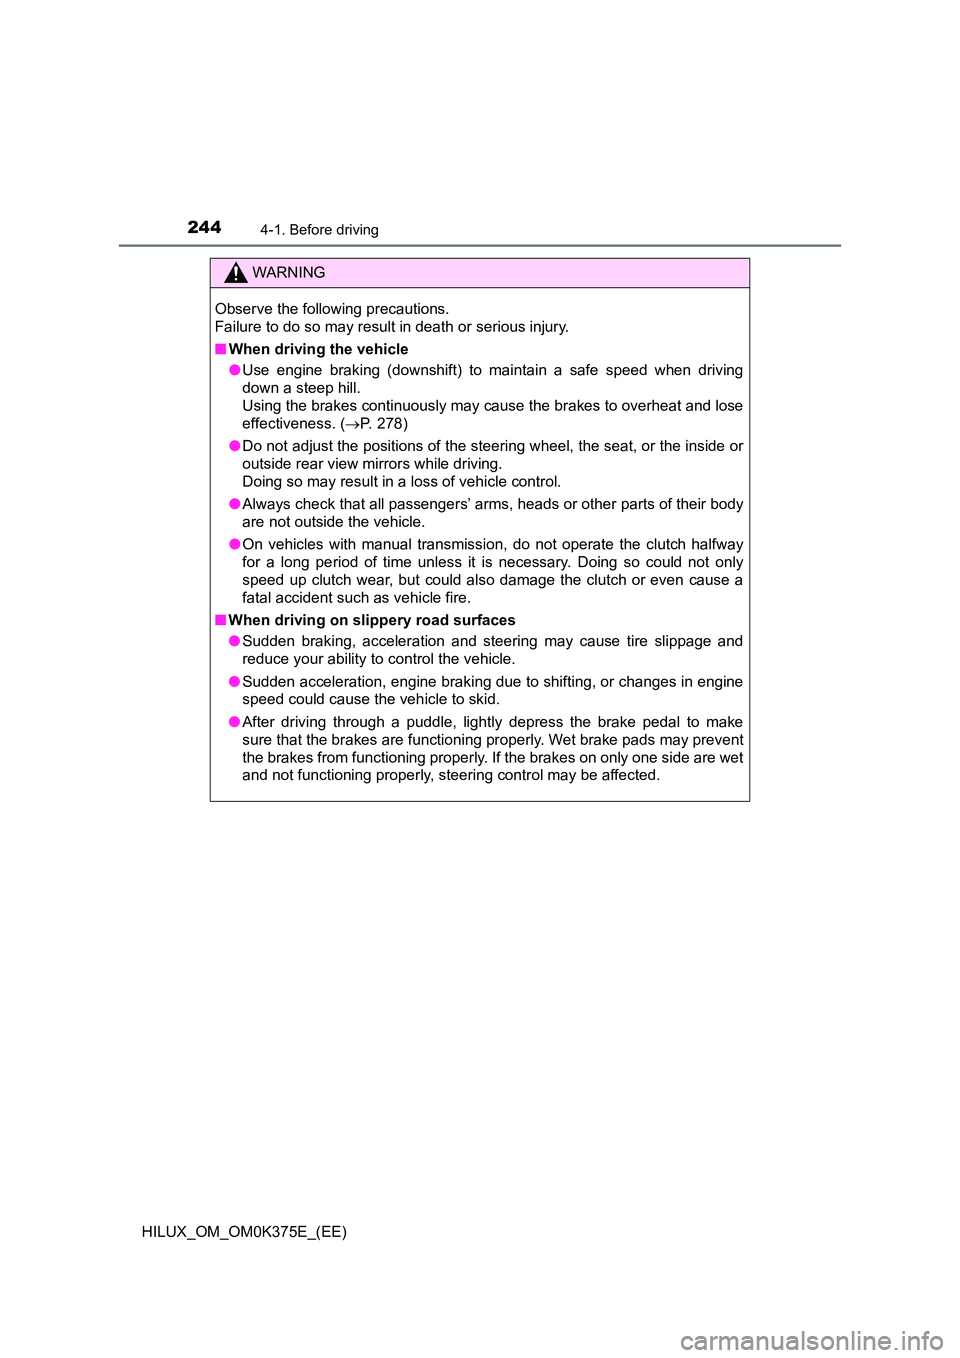 TOYOTA HILUX 2018  Owners Manual 2444-1. Before driving
HILUX_OM_OM0K375E_(EE)
WARNING
Observe the following precautions. 
Failure to do so may result in death or serious injury. 
■ When driving the vehicle 
● Use engine braking 